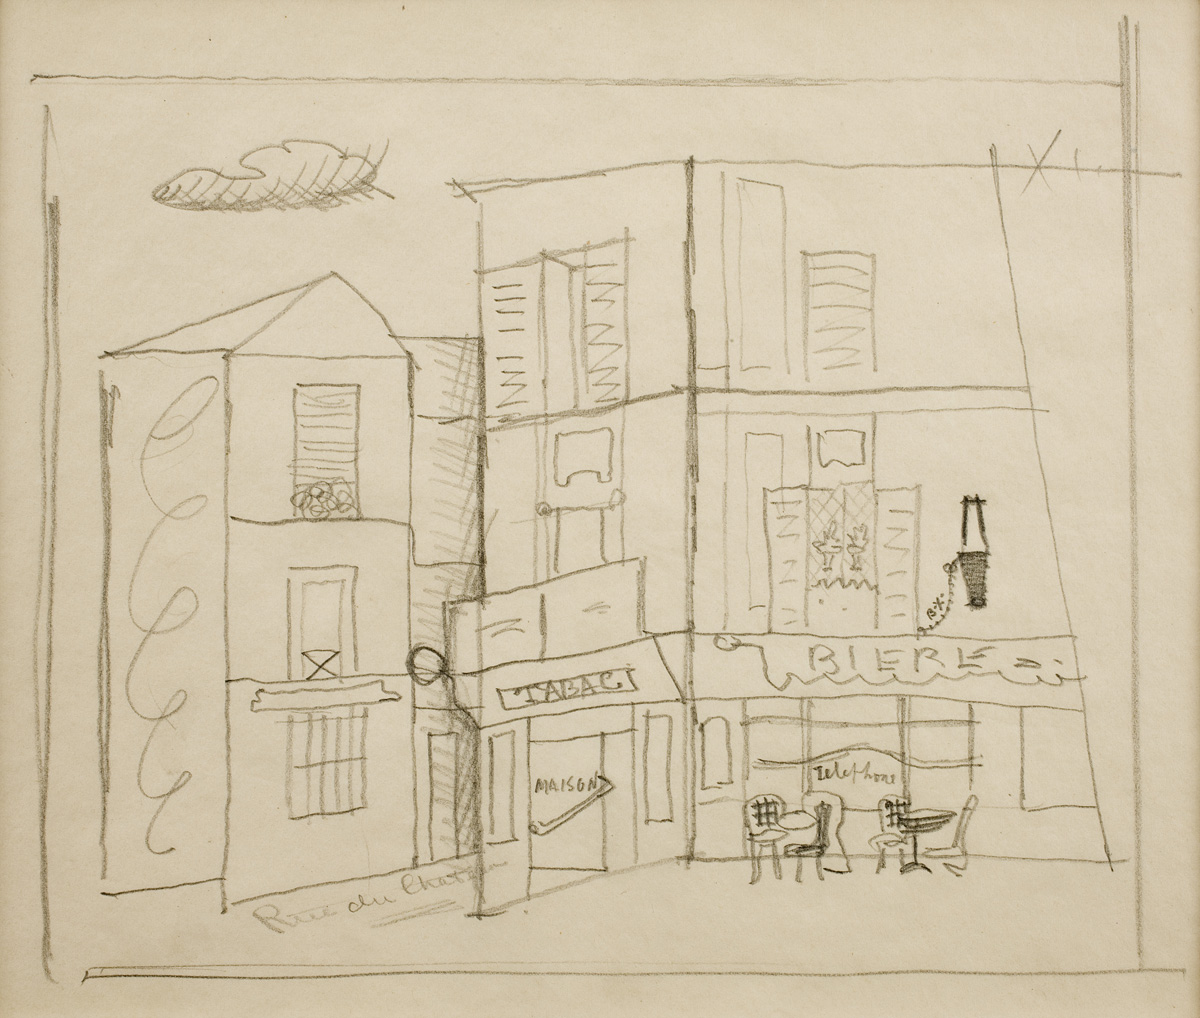 Drawing of a street in France with a Tabac shop and a cafe/bar